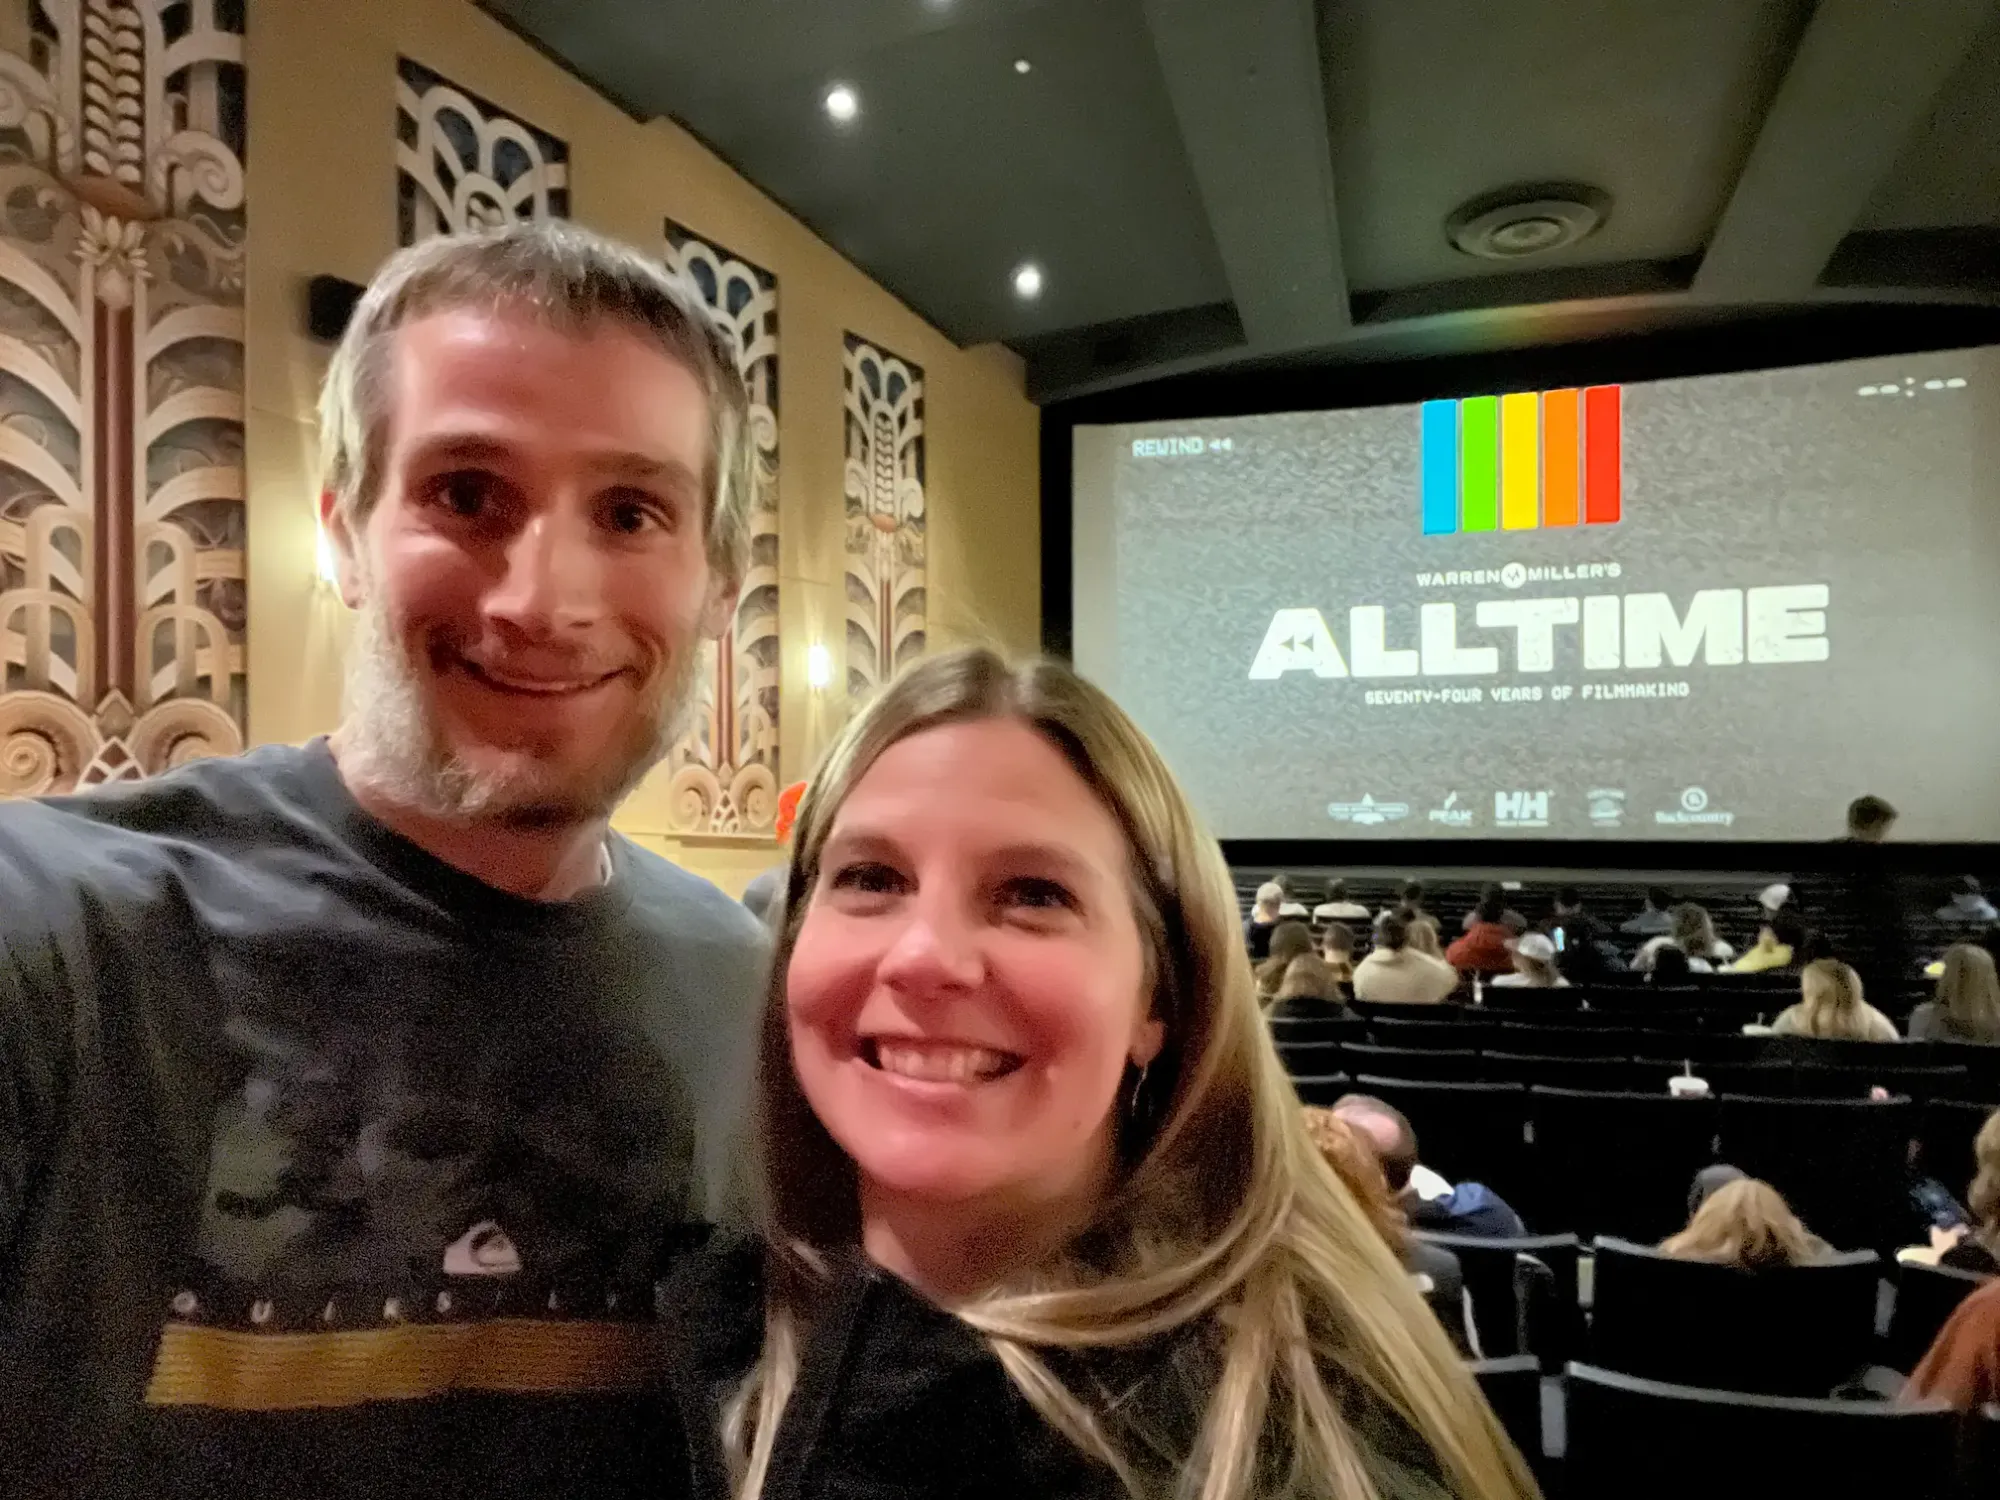 Keith and Lindsey are getting stoked to watch the latest Warren Miller film: "All Time"